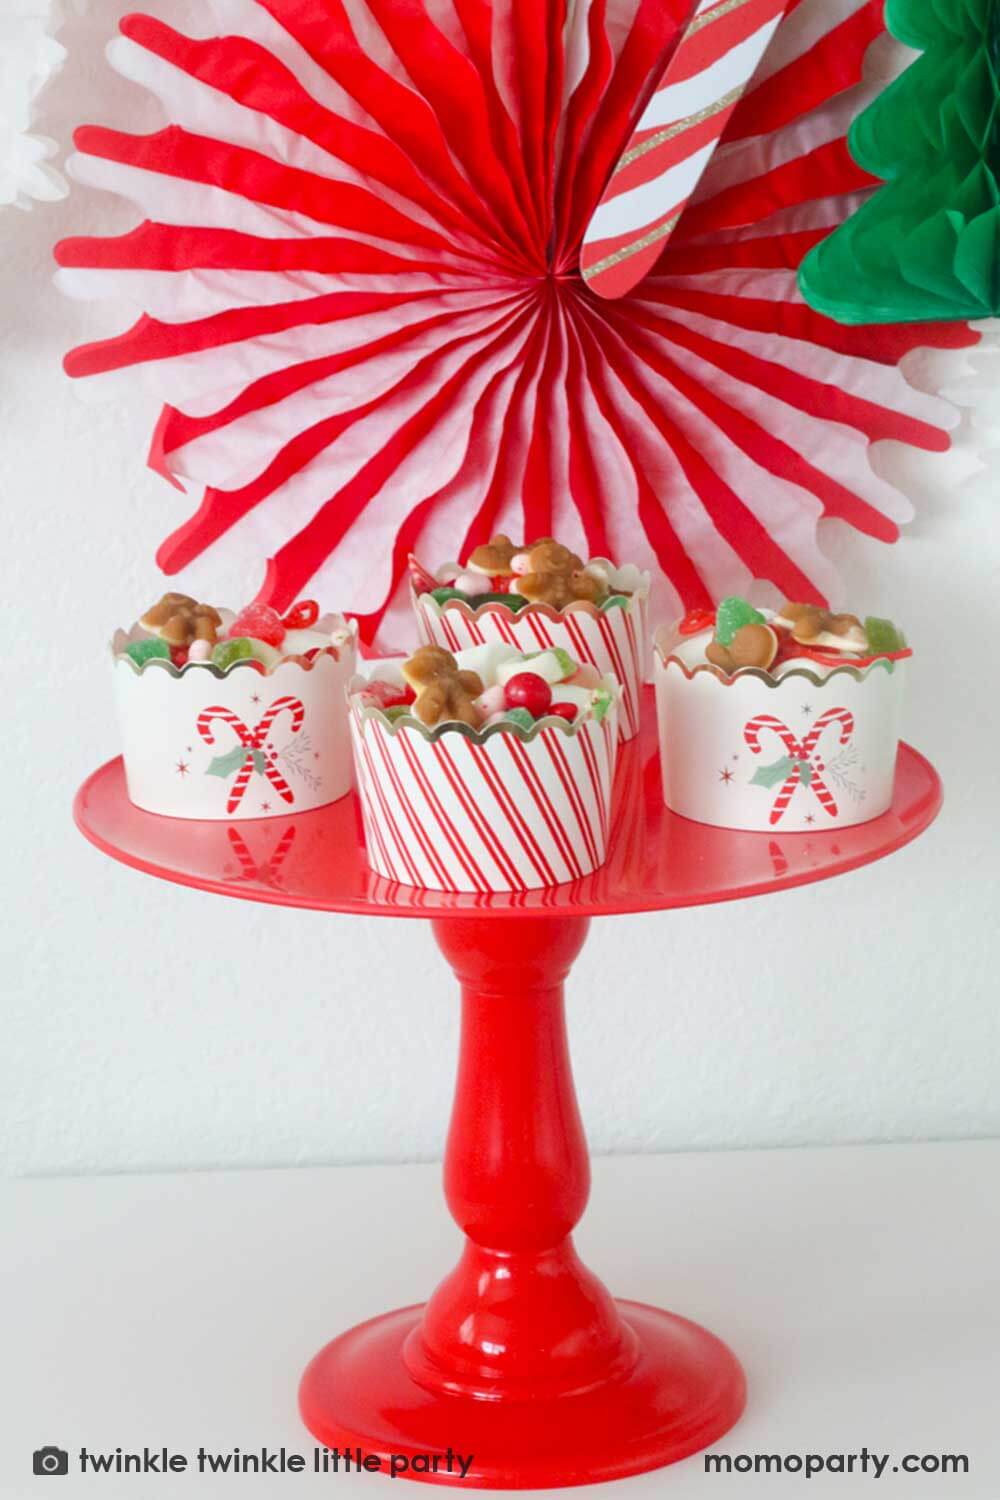 A Christmas Dessert Table decorated with Momo Party's Christmas honeycomb decorations featuring candy canes, honeycomb Christmas trees and mint honeycomb balls. On the table there's a red cake stand with Momo Party's Candy Cane Jumbo food cups filled with lots of Holiday teats including candies, gummies and red gum balls, making this a great idea for Holiday party treat and snack ideas for kids.